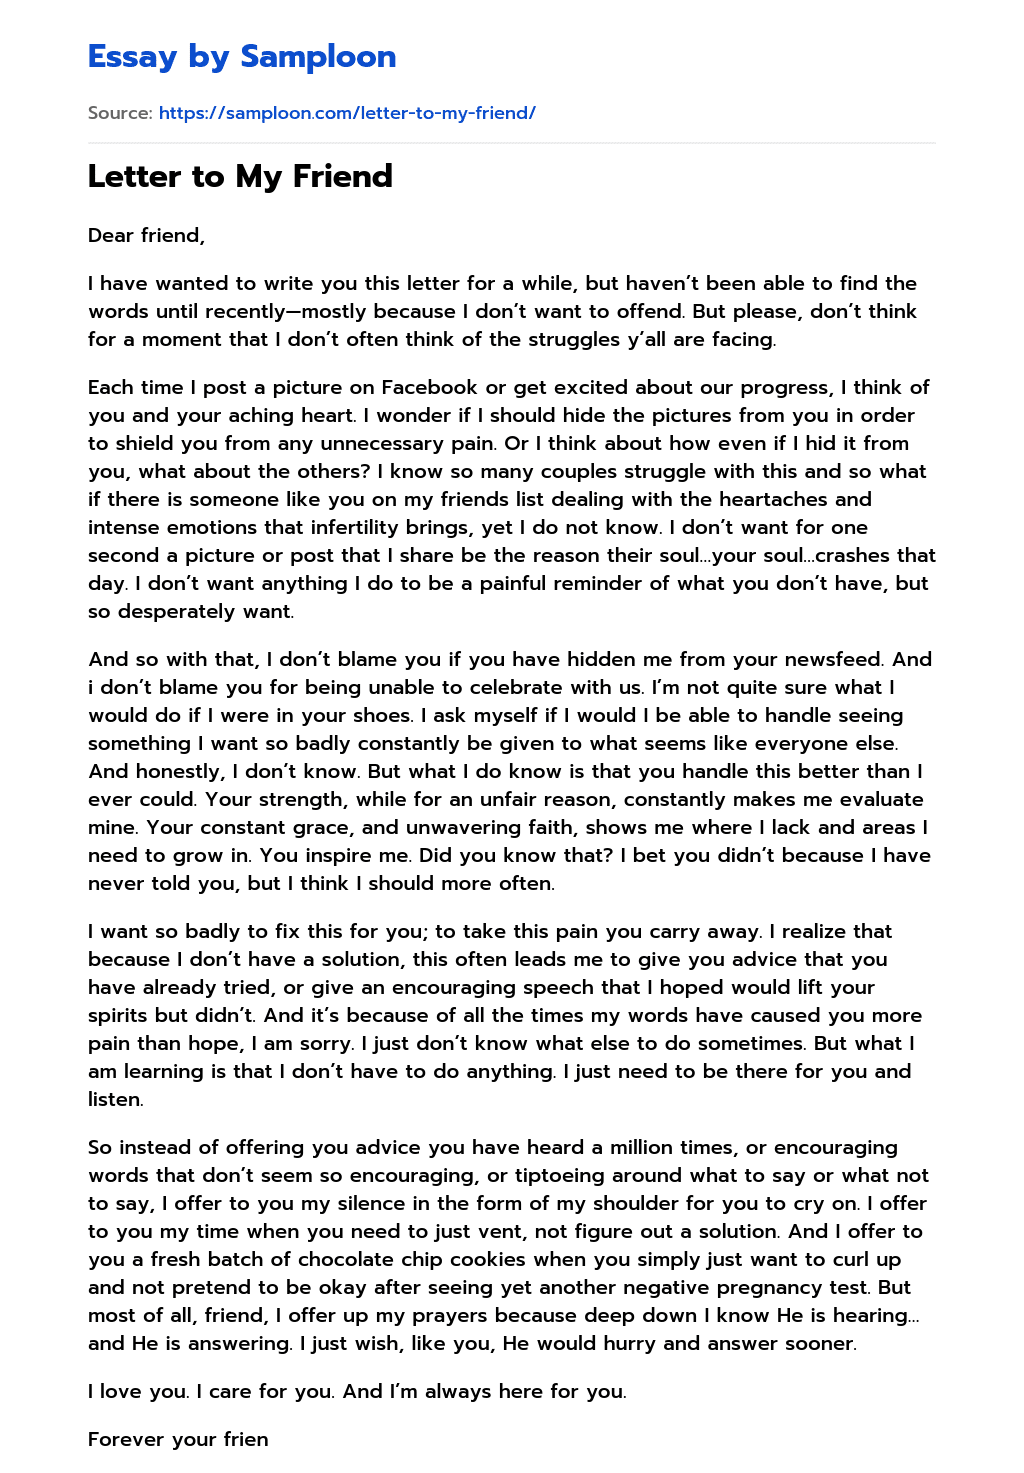 Letter to My Friend essay